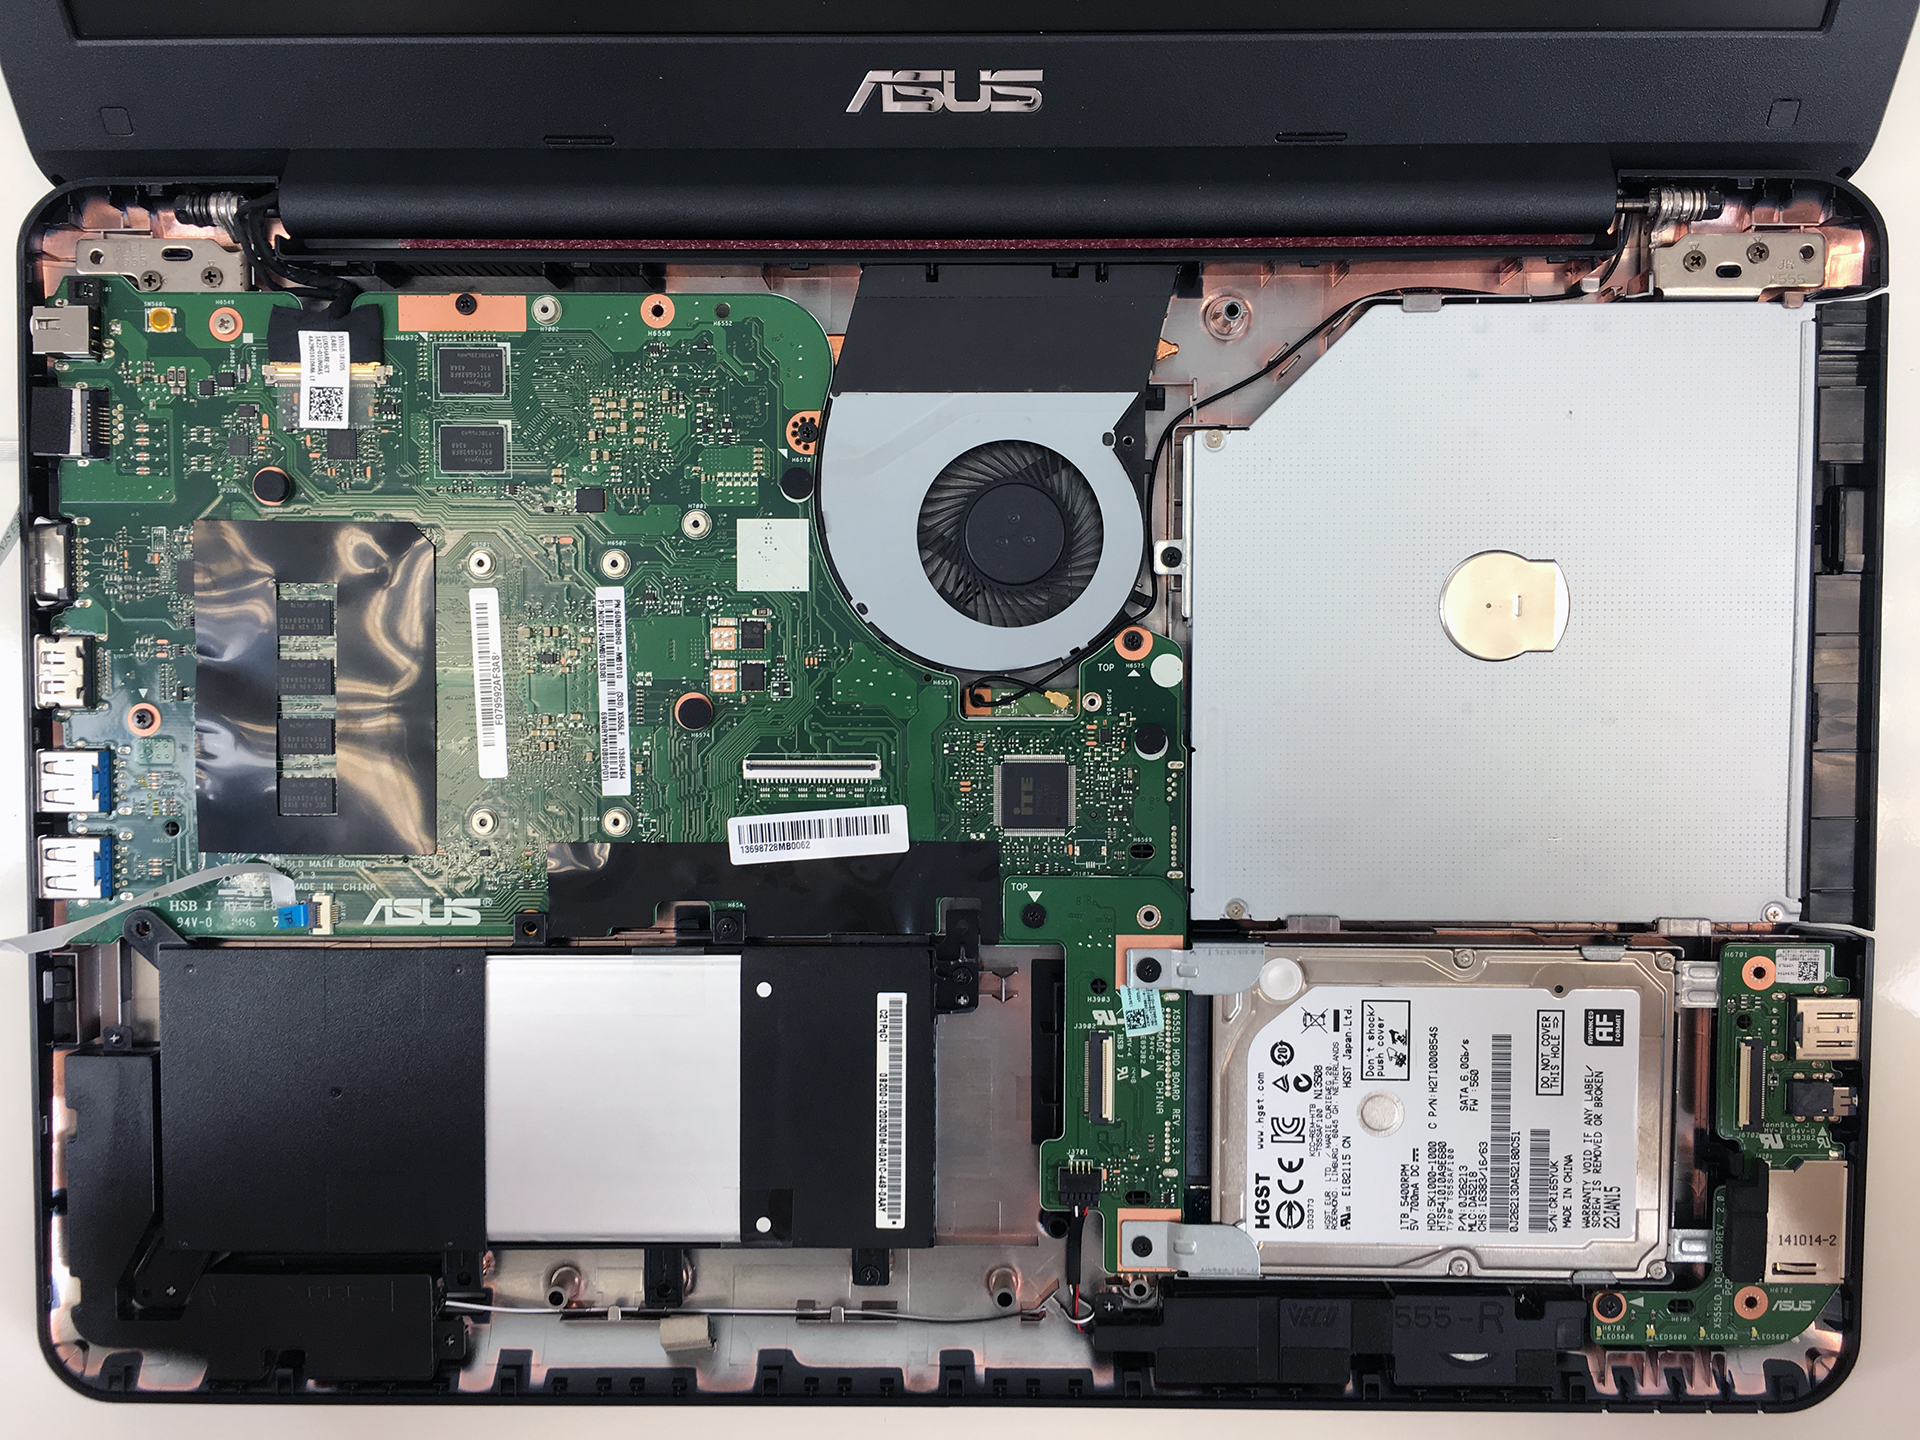 Inside ASUS X555 / K555 - disassembly, photos and upgrade options | LaptopMedia.com